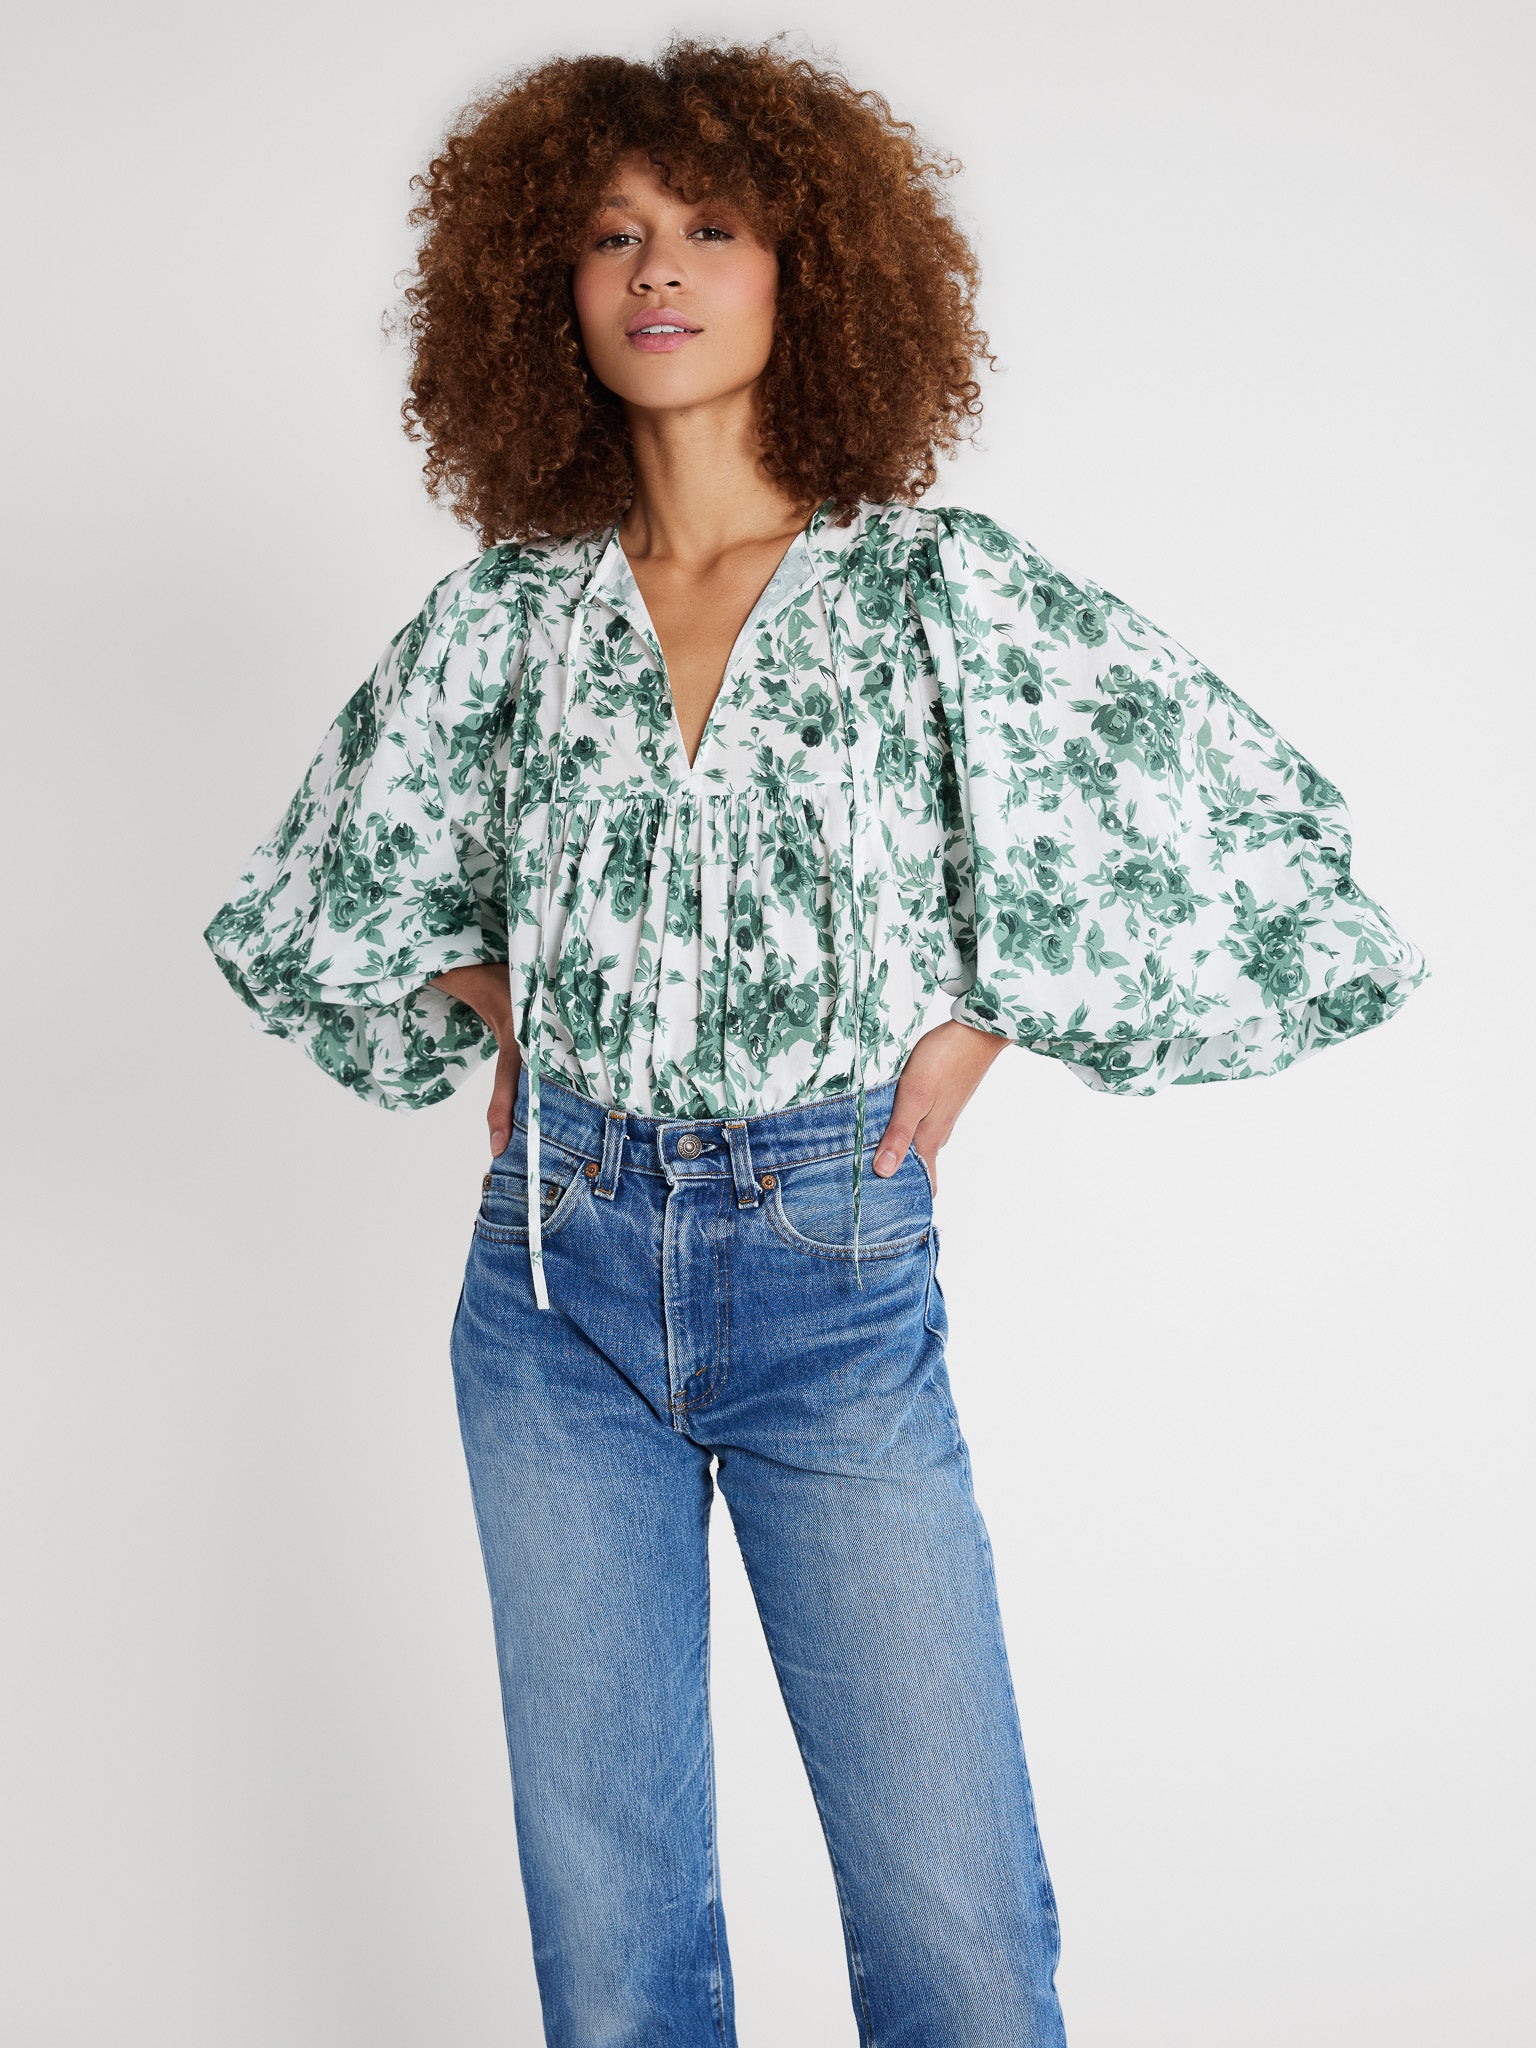 MILLE Clothing Charlie Top in Green Bouquet